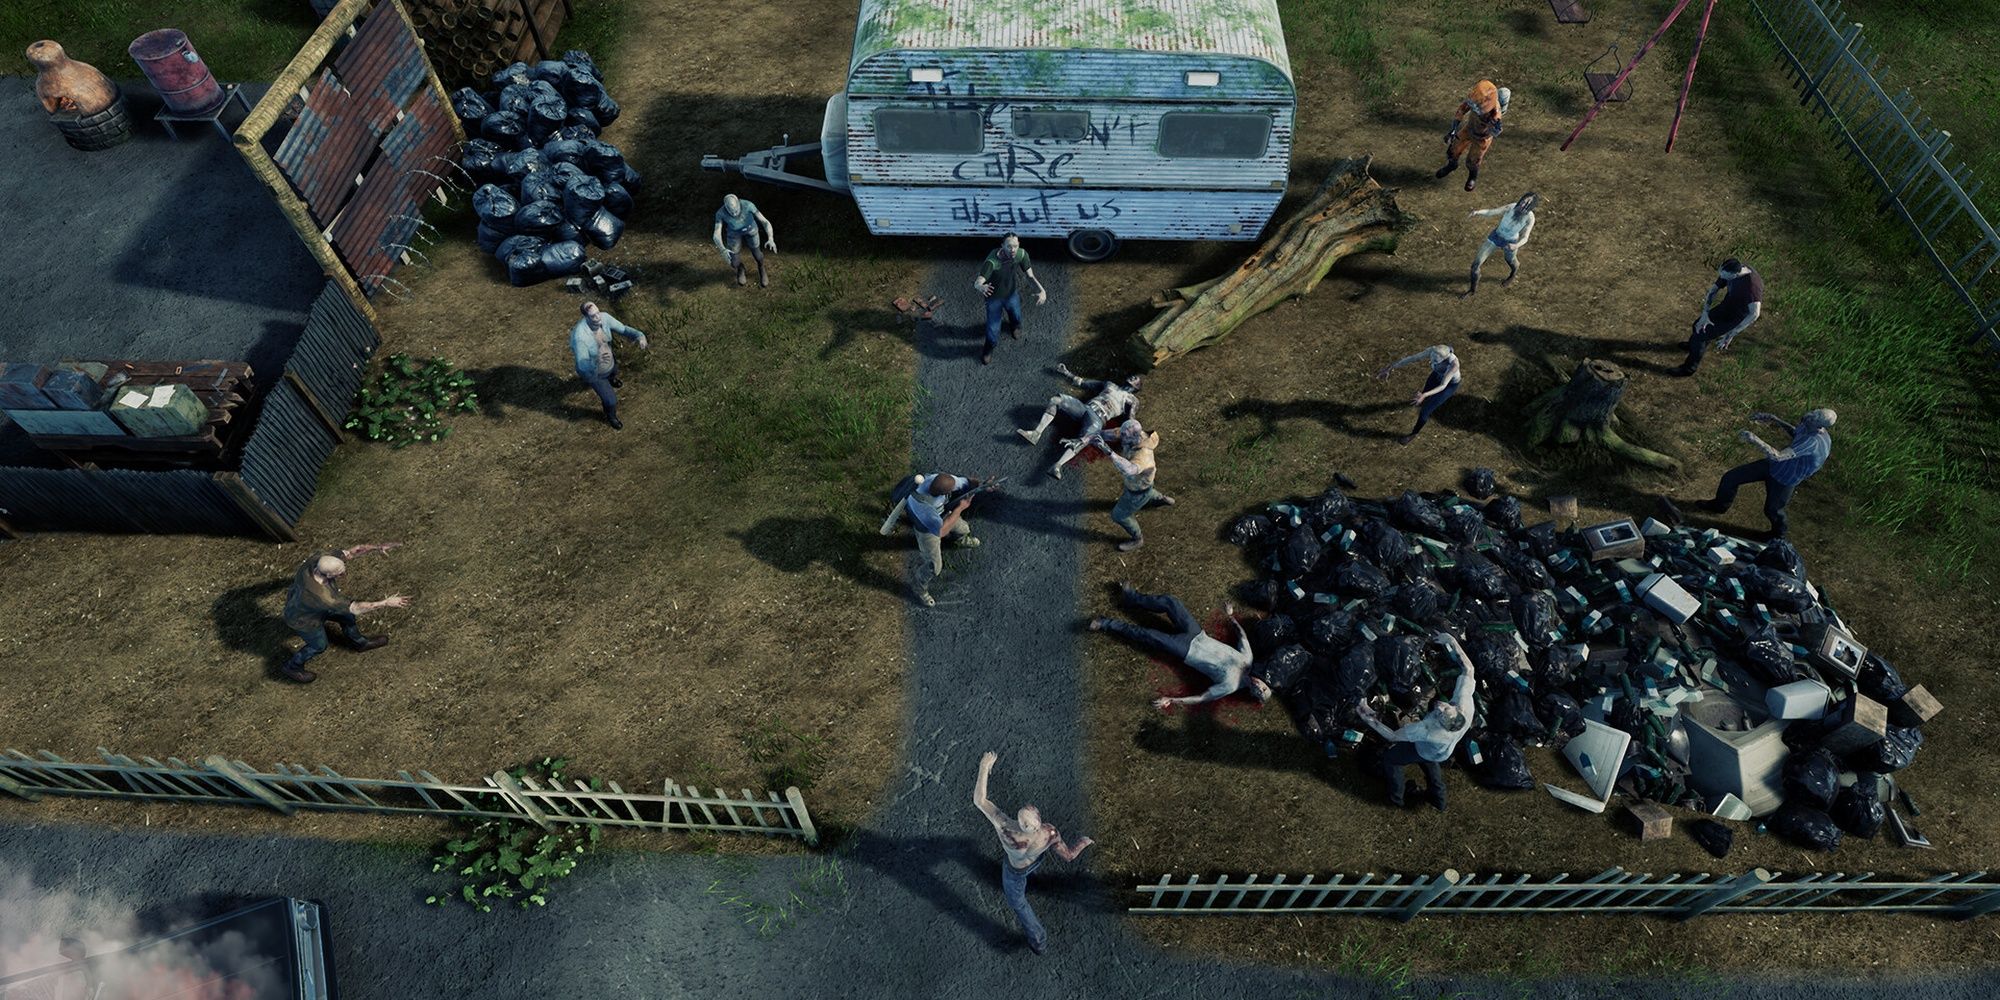 HumanitZ: A Trailer Park Filling With Zombies About To Attack A Human